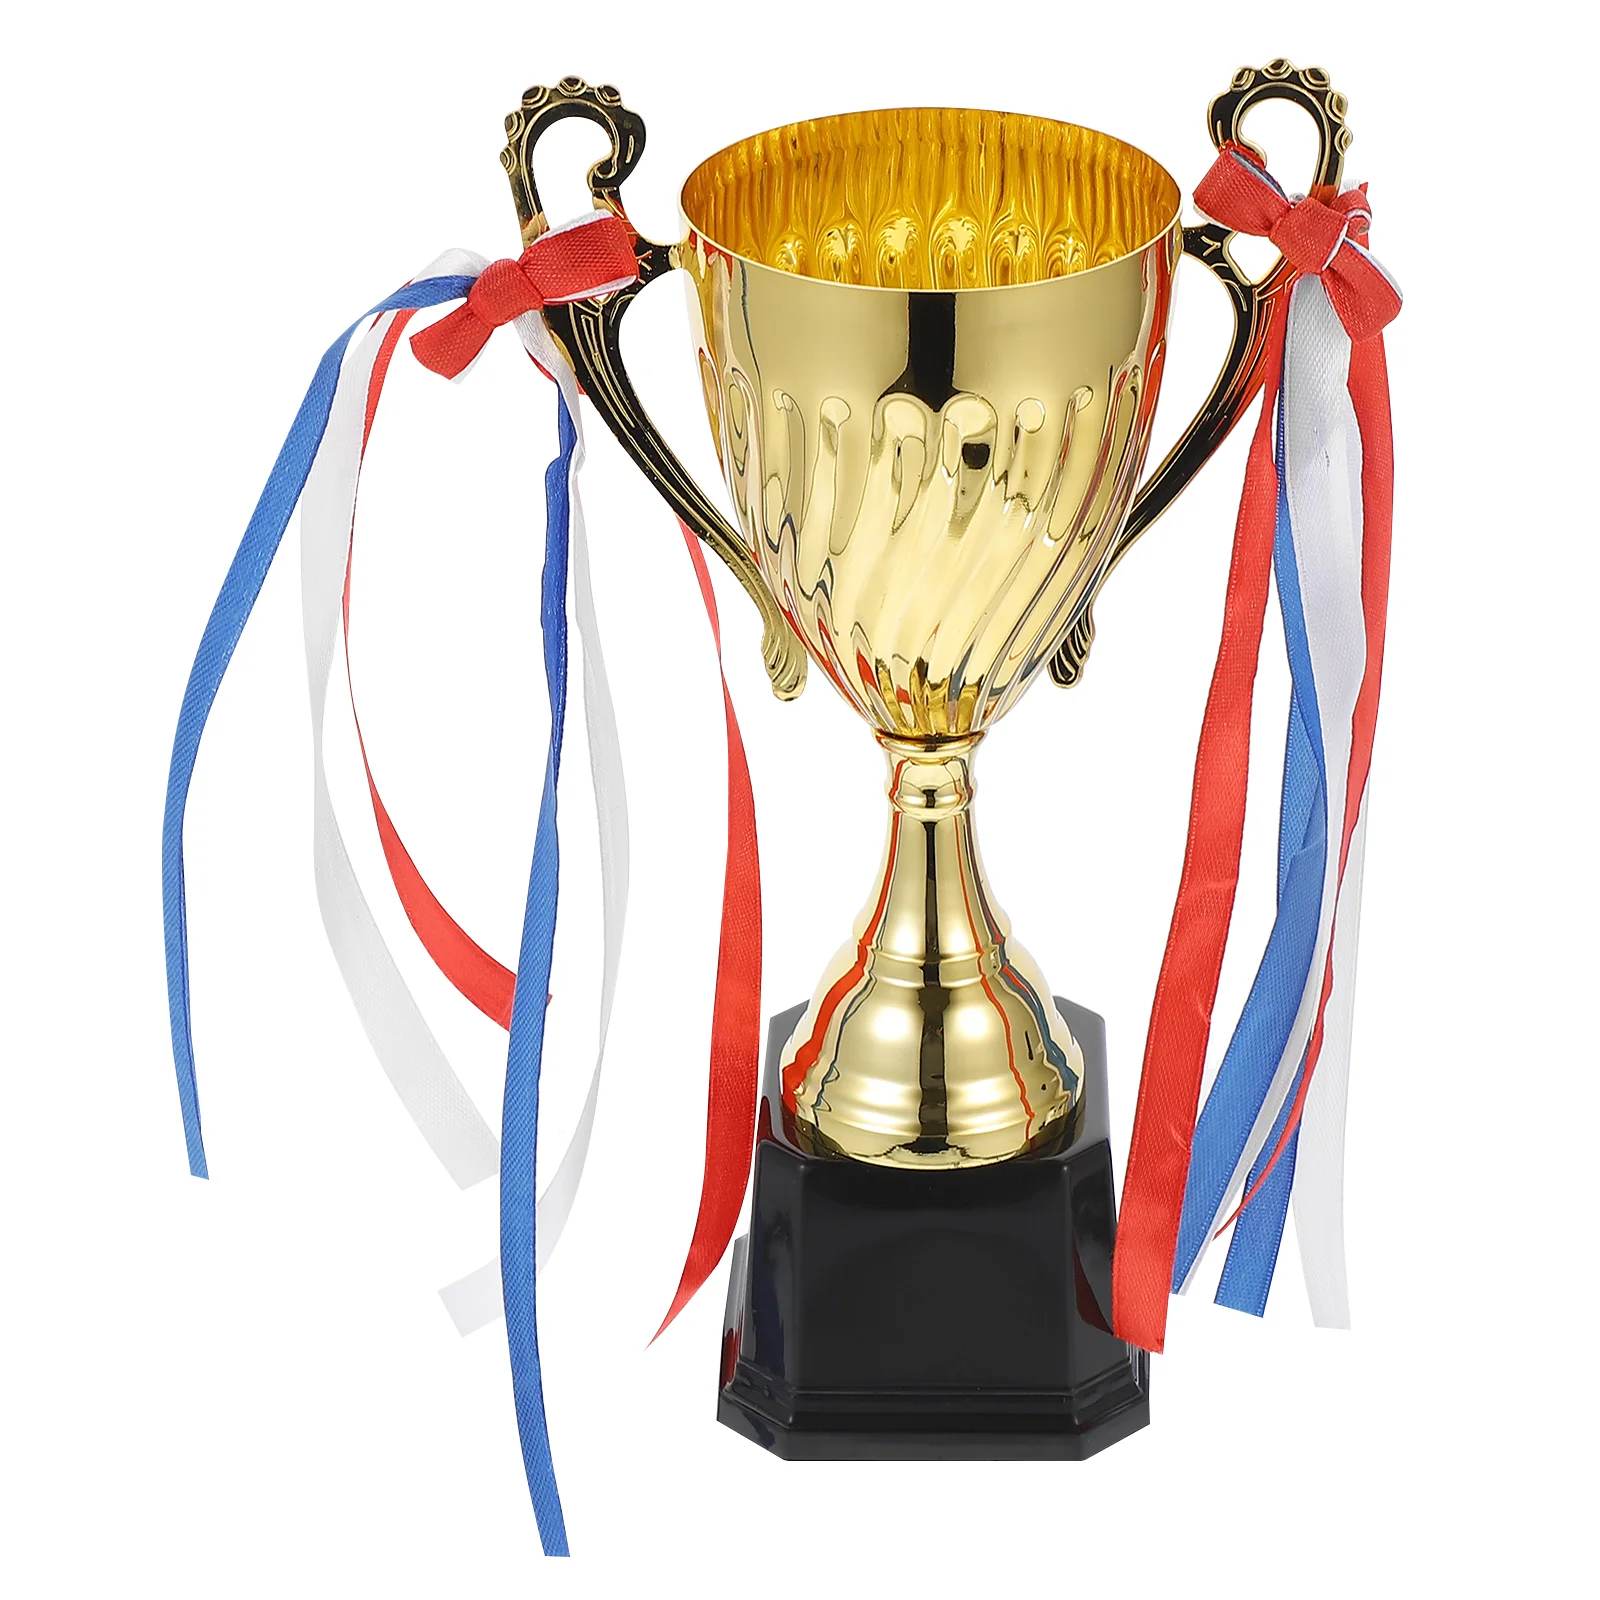 

Trophy Trophies Award Gold Sports Kids Awards Cup Party Basketball Medals Game Competition Classic Cups Football Favor Winner